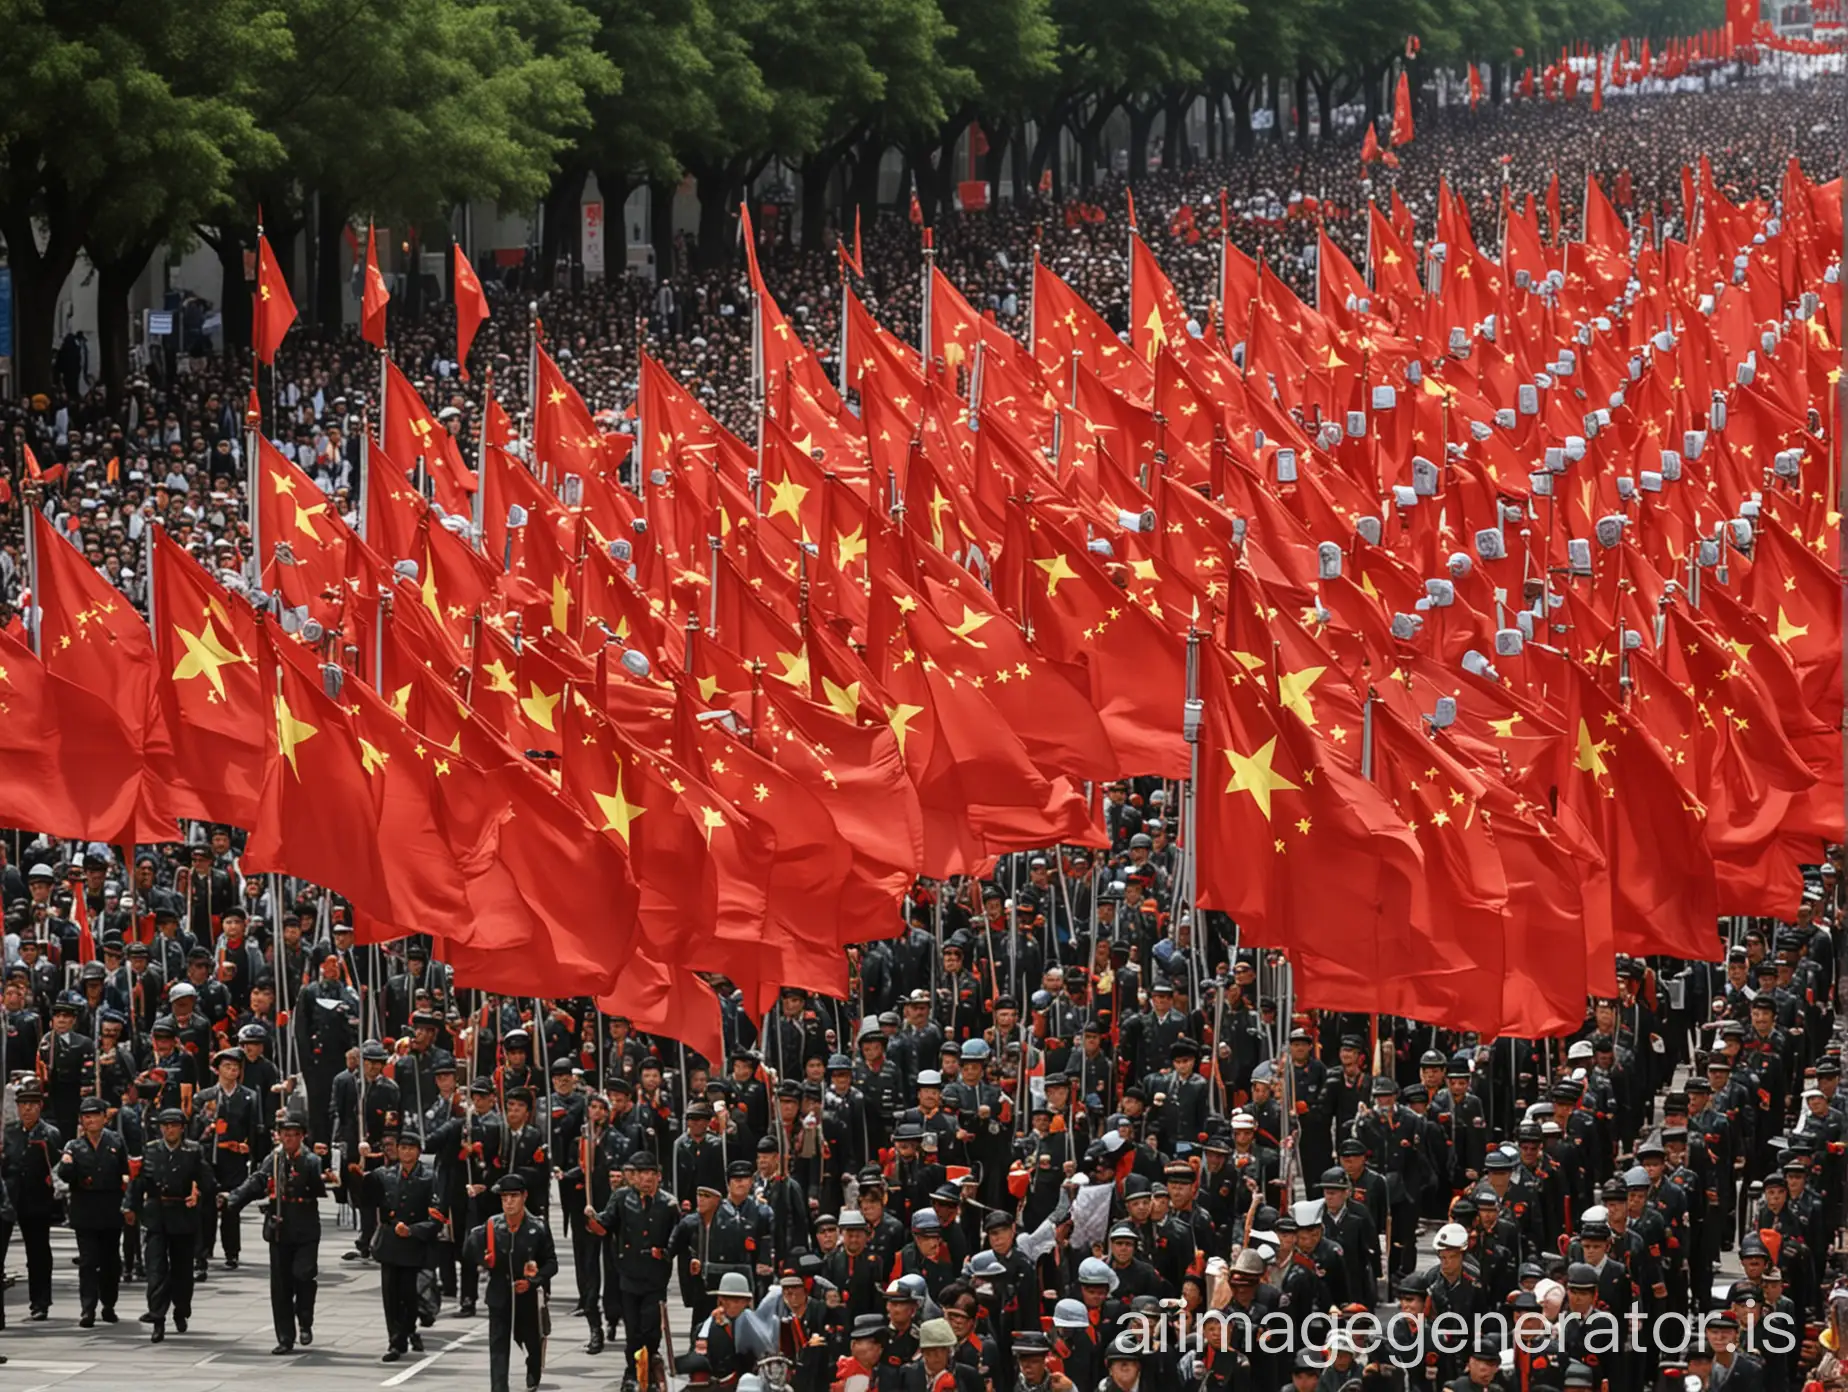 2019 celebrates the 105th anniversary of China's May Fourth Movement, with a flag